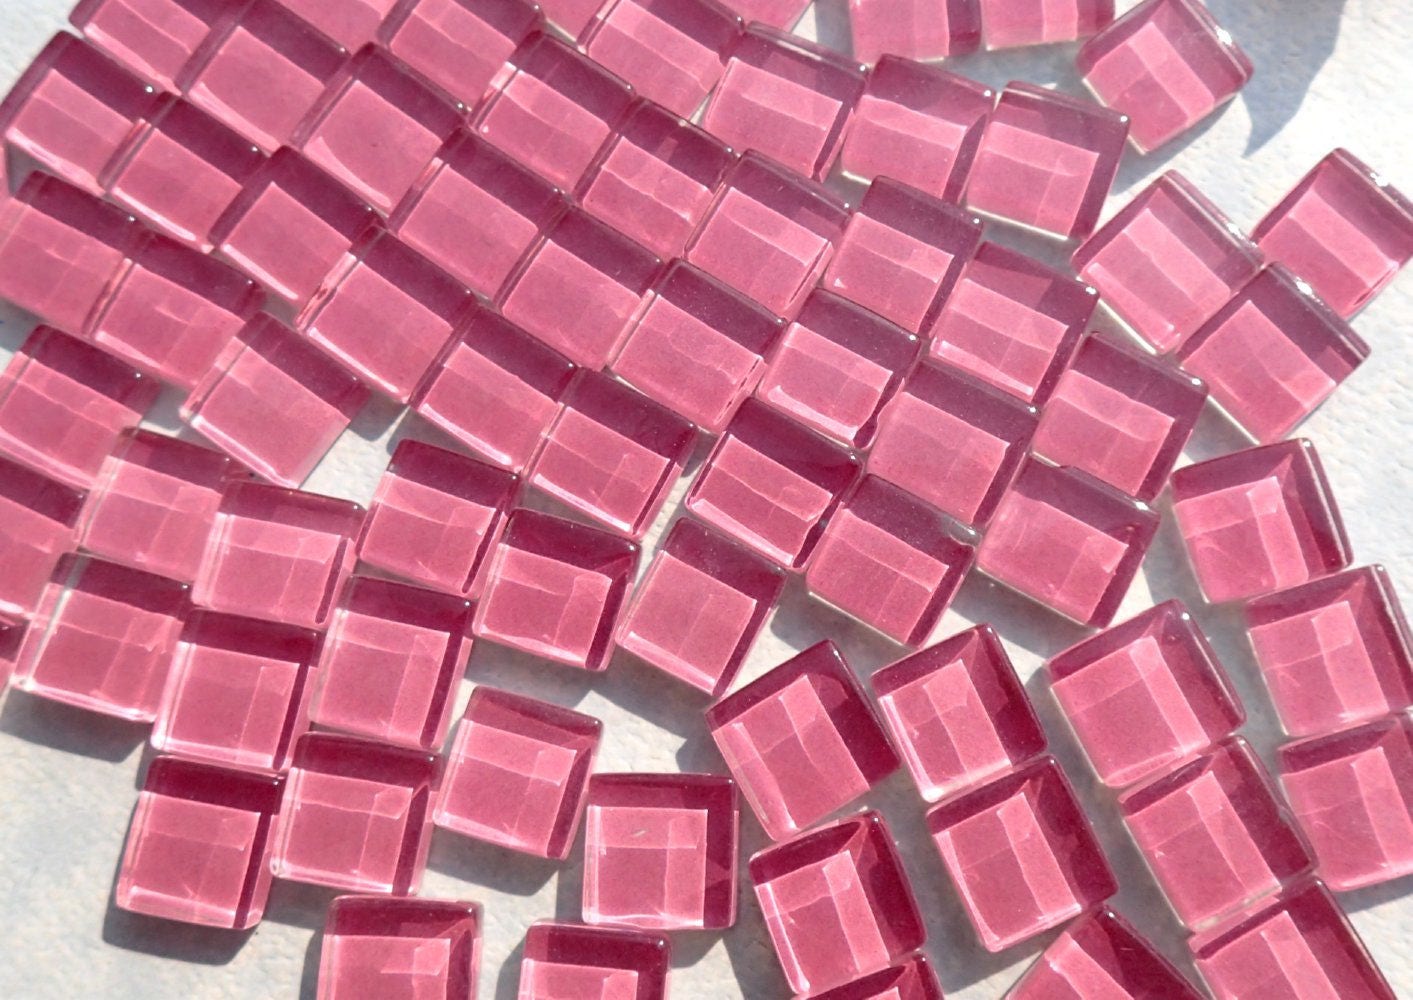 Deep Pink Glass Tiles - 1 cm - 100g - Over 100 Squares